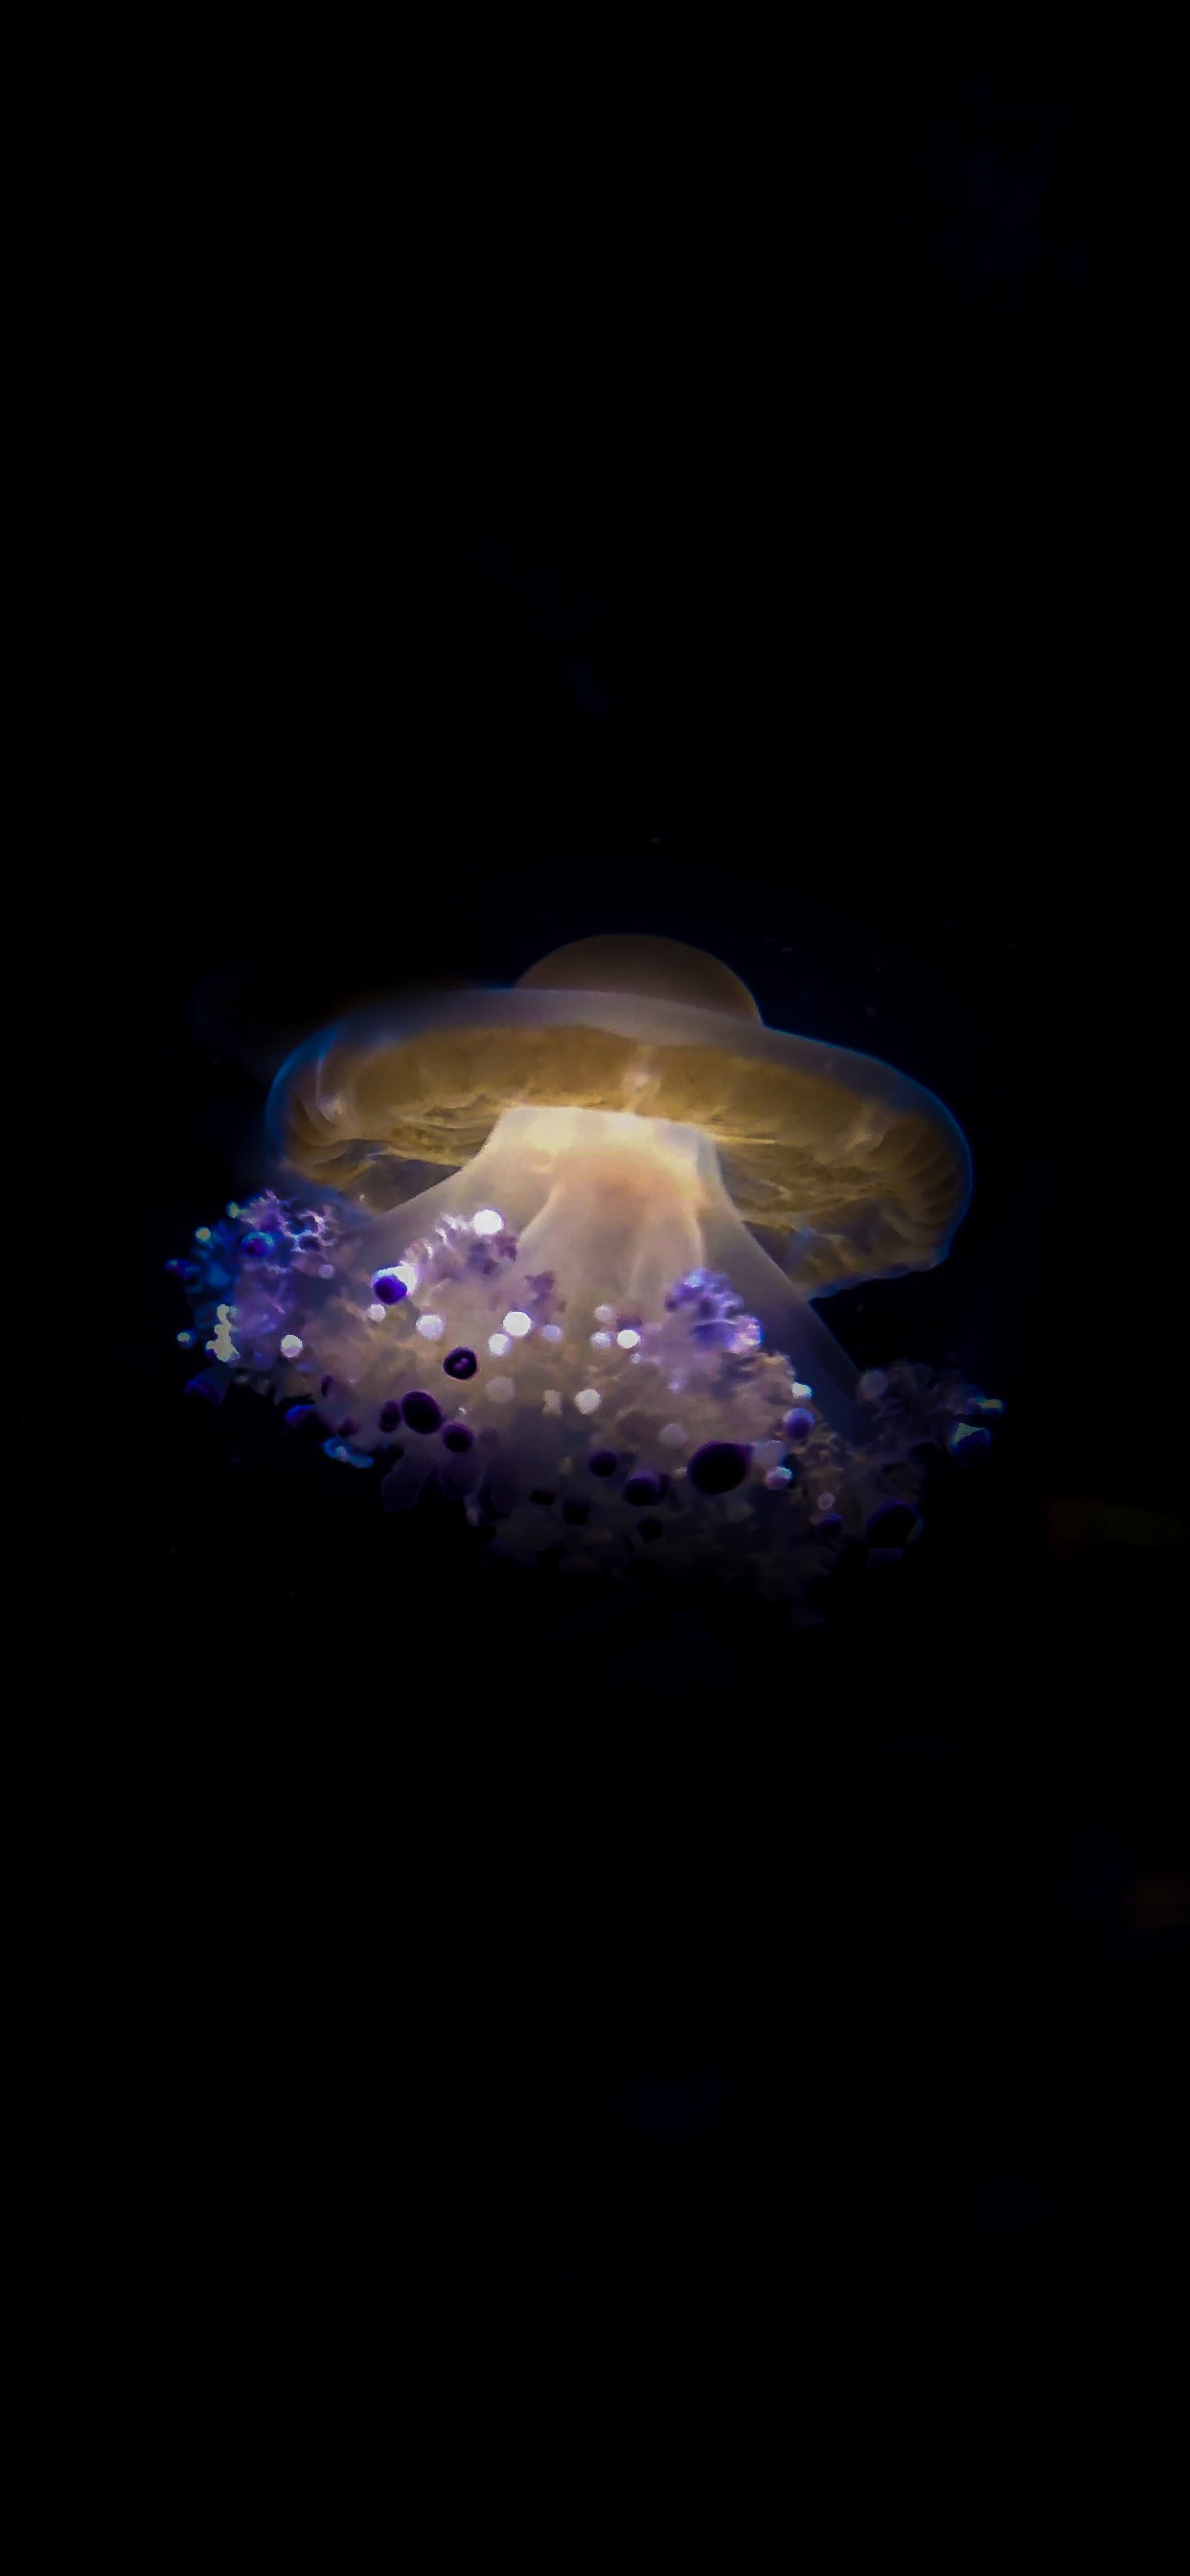 iPhone jellyfish wallpaper, High-quality images, Free download, Wallpaper bliss, 1250x2690 HD Phone